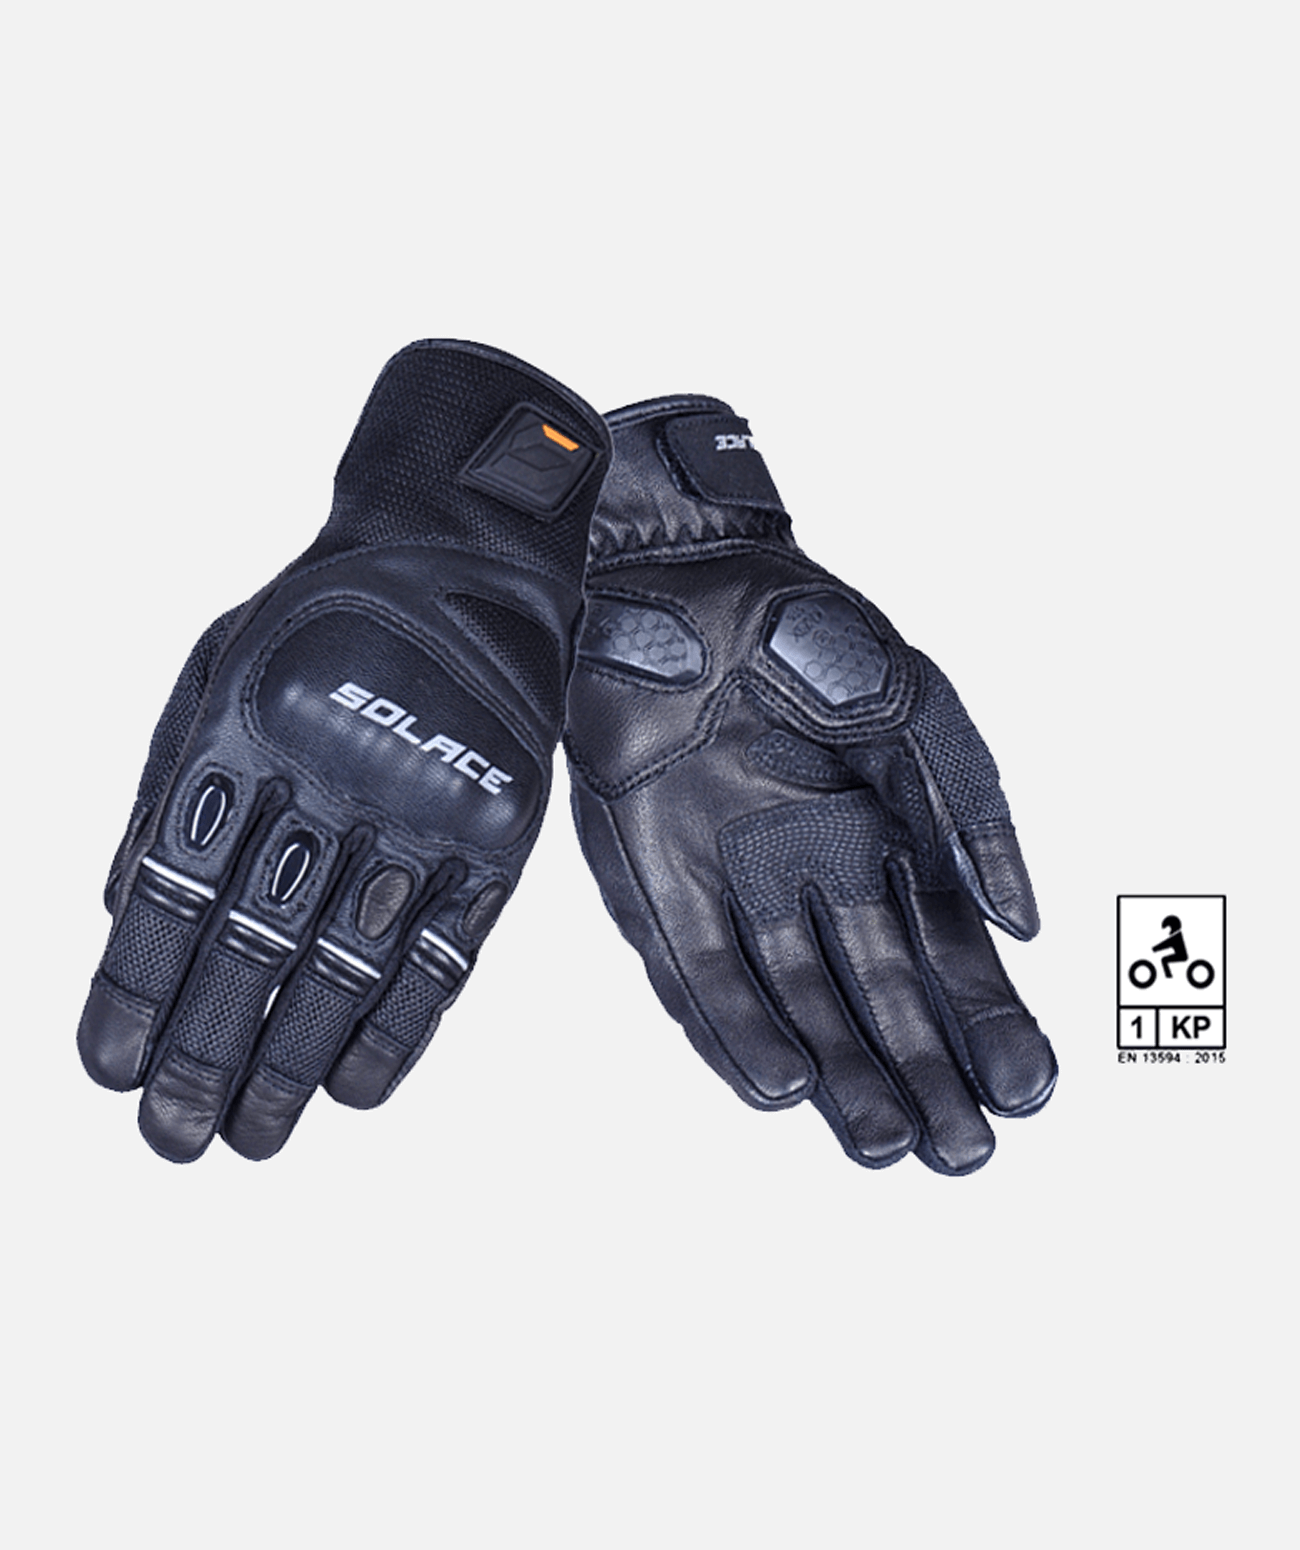 SOLACE Riding Gloves Rival Black, CE approved